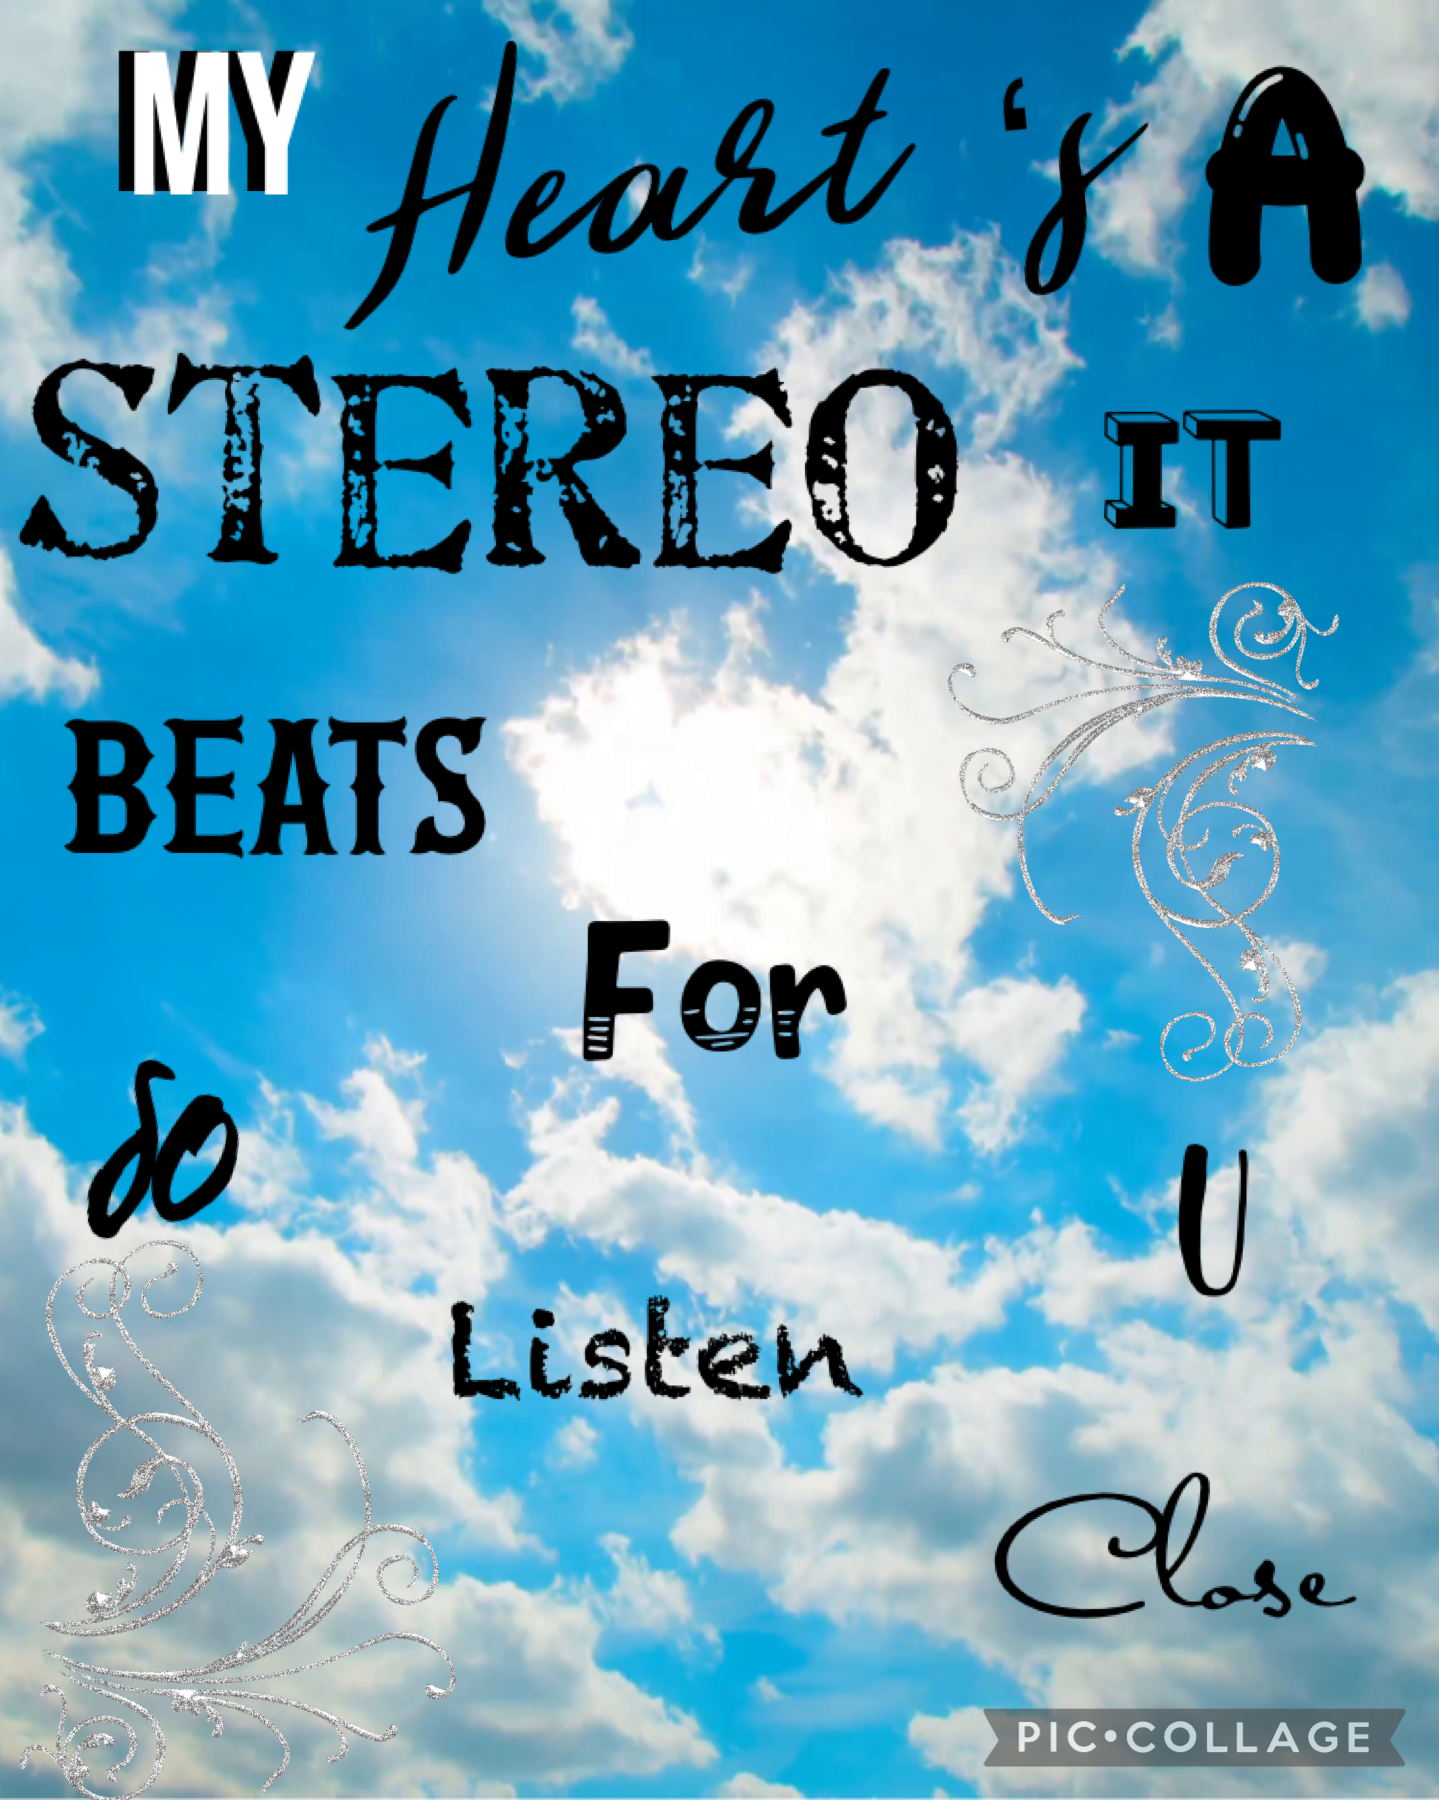 By: Gym class heroes! (Stereo hearts ) 